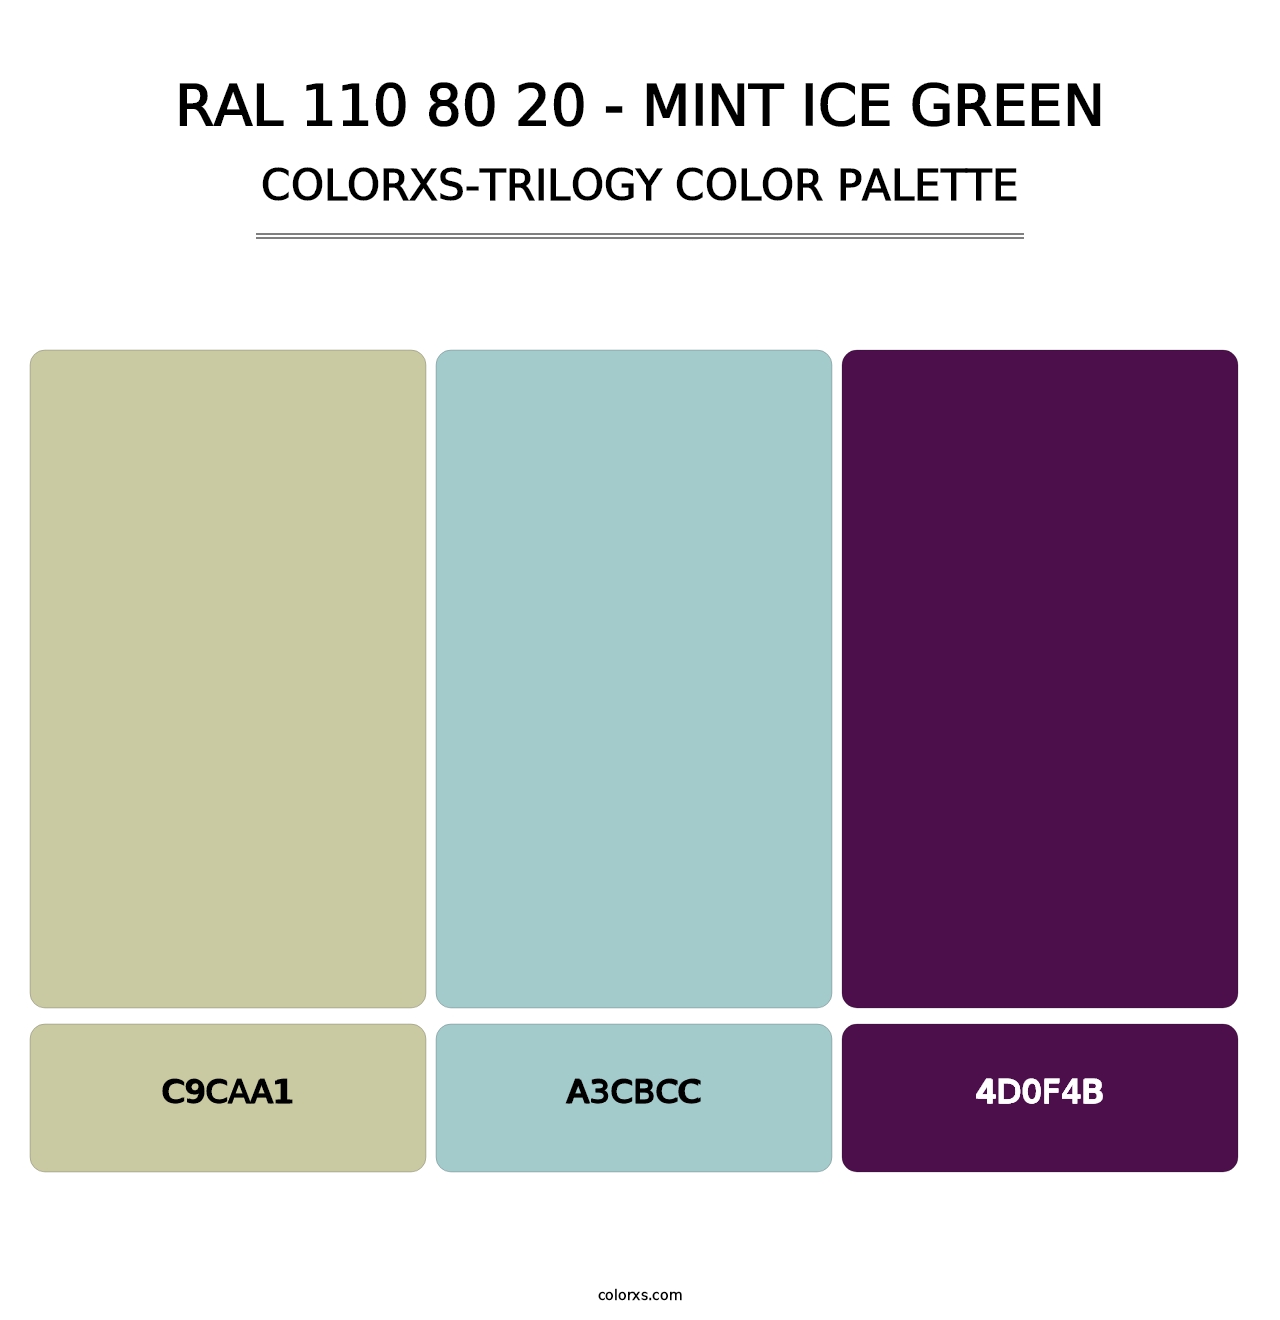 RAL 110 80 20 - Mint Ice Green - Colorxs Trilogy Palette